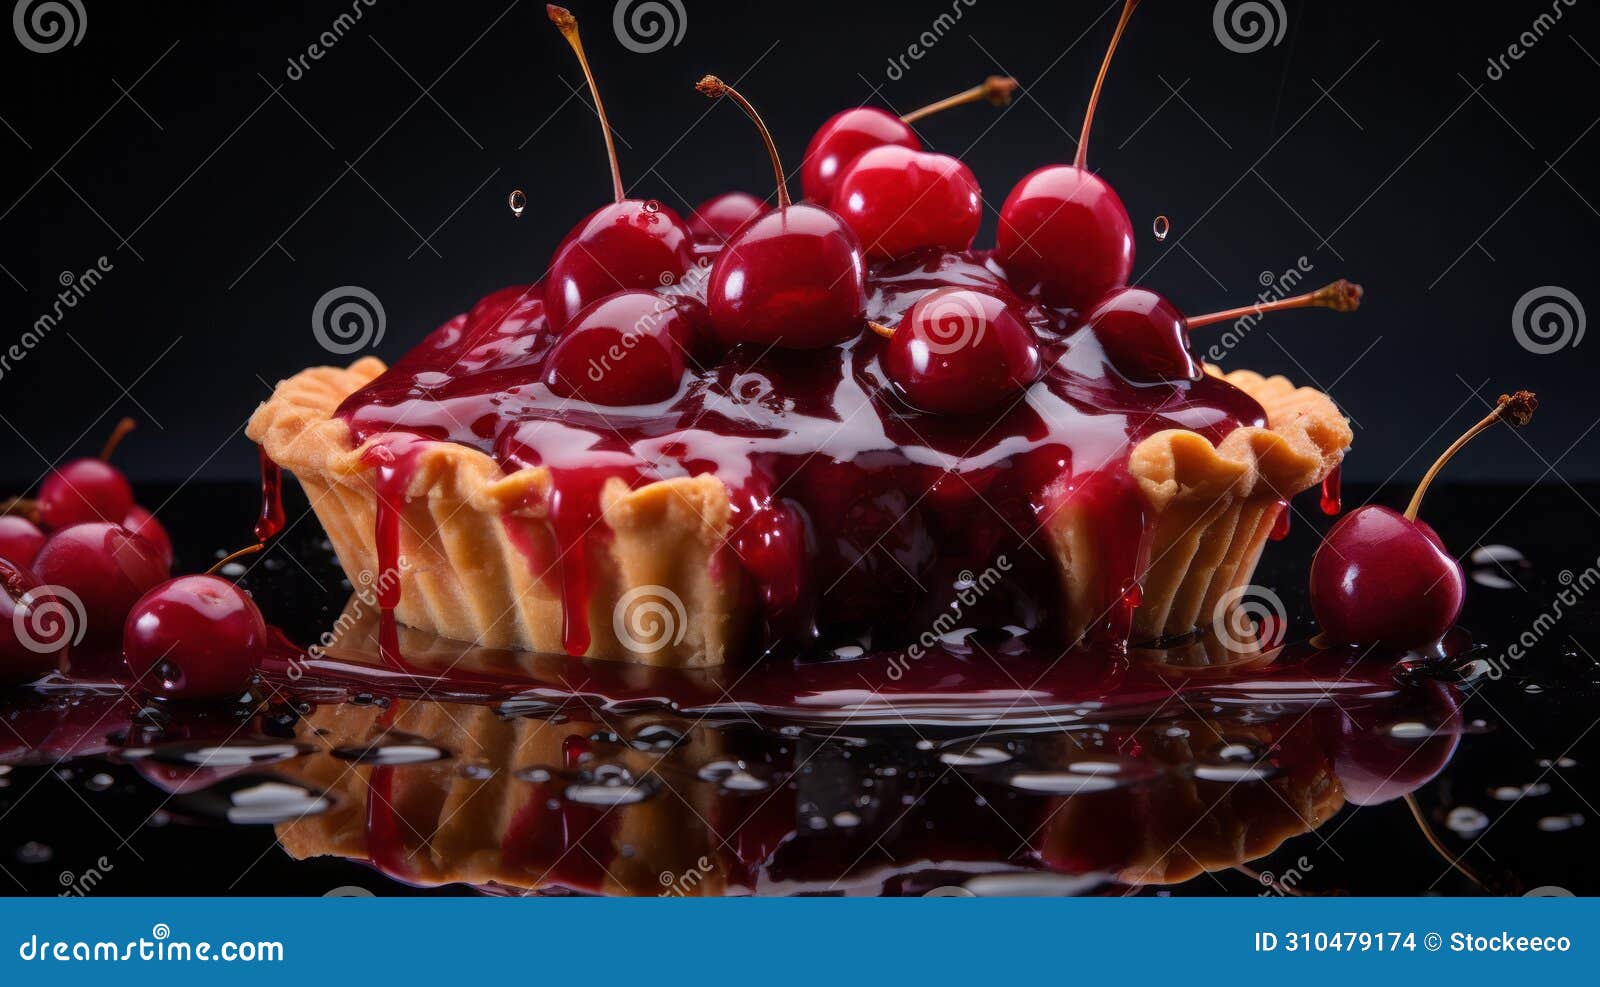 immersive cherry pie artwork inspired by olivier ledroit, miki asai, and herve guibert